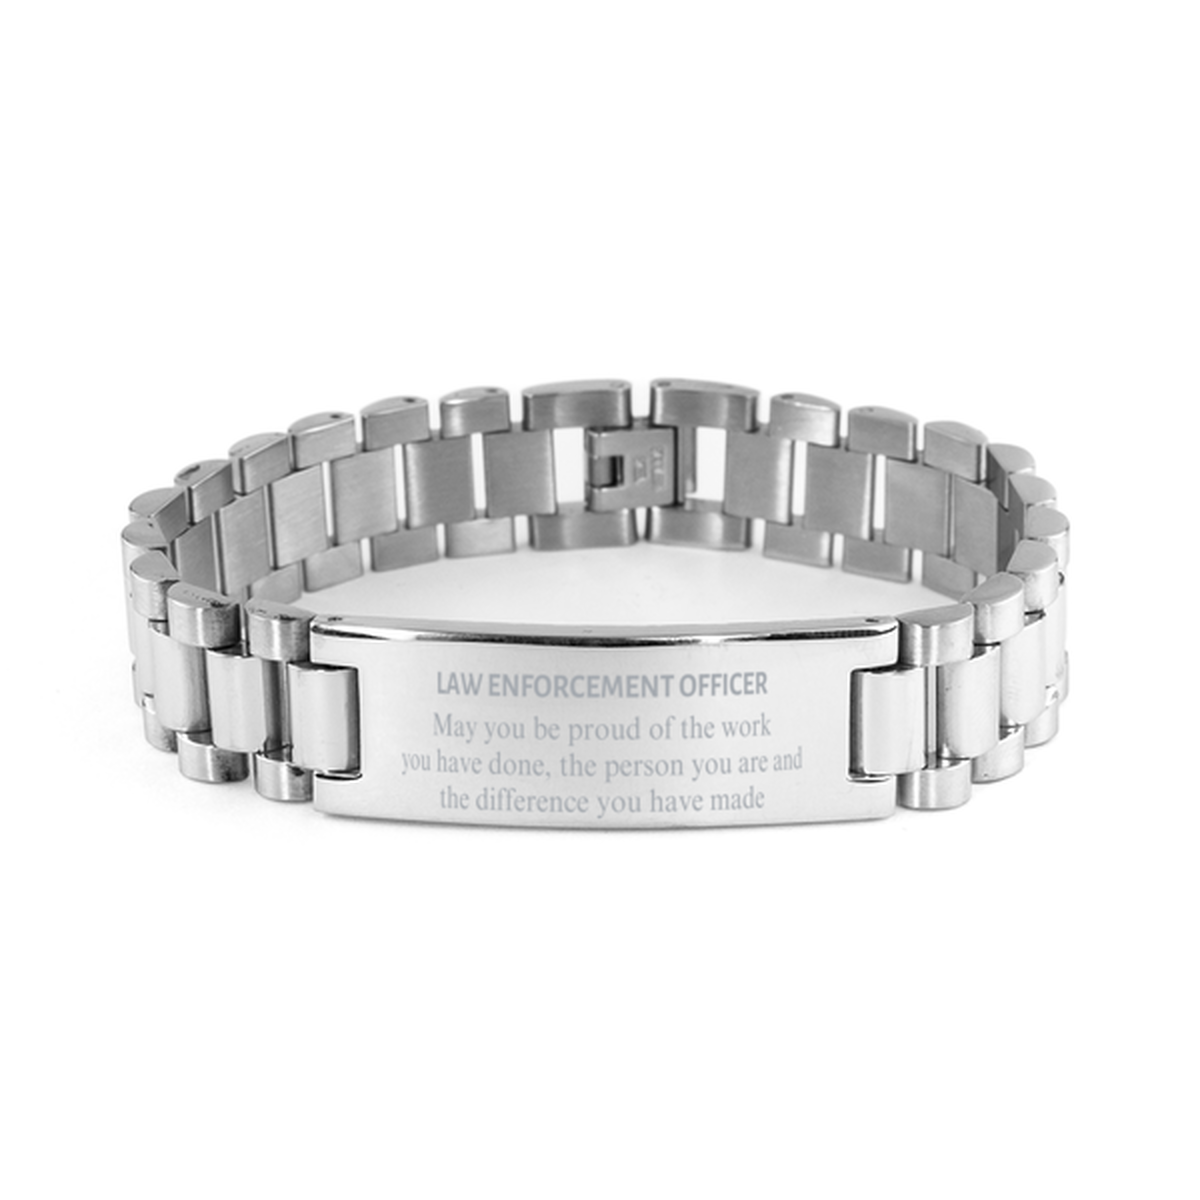 Law Enforcement Officer May you be proud of the work you have done, Retirement Law Enforcement Officer Ladder Stainless Steel Bracelet for Colleague Appreciation Gifts Amazing for Law Enforcement Officer